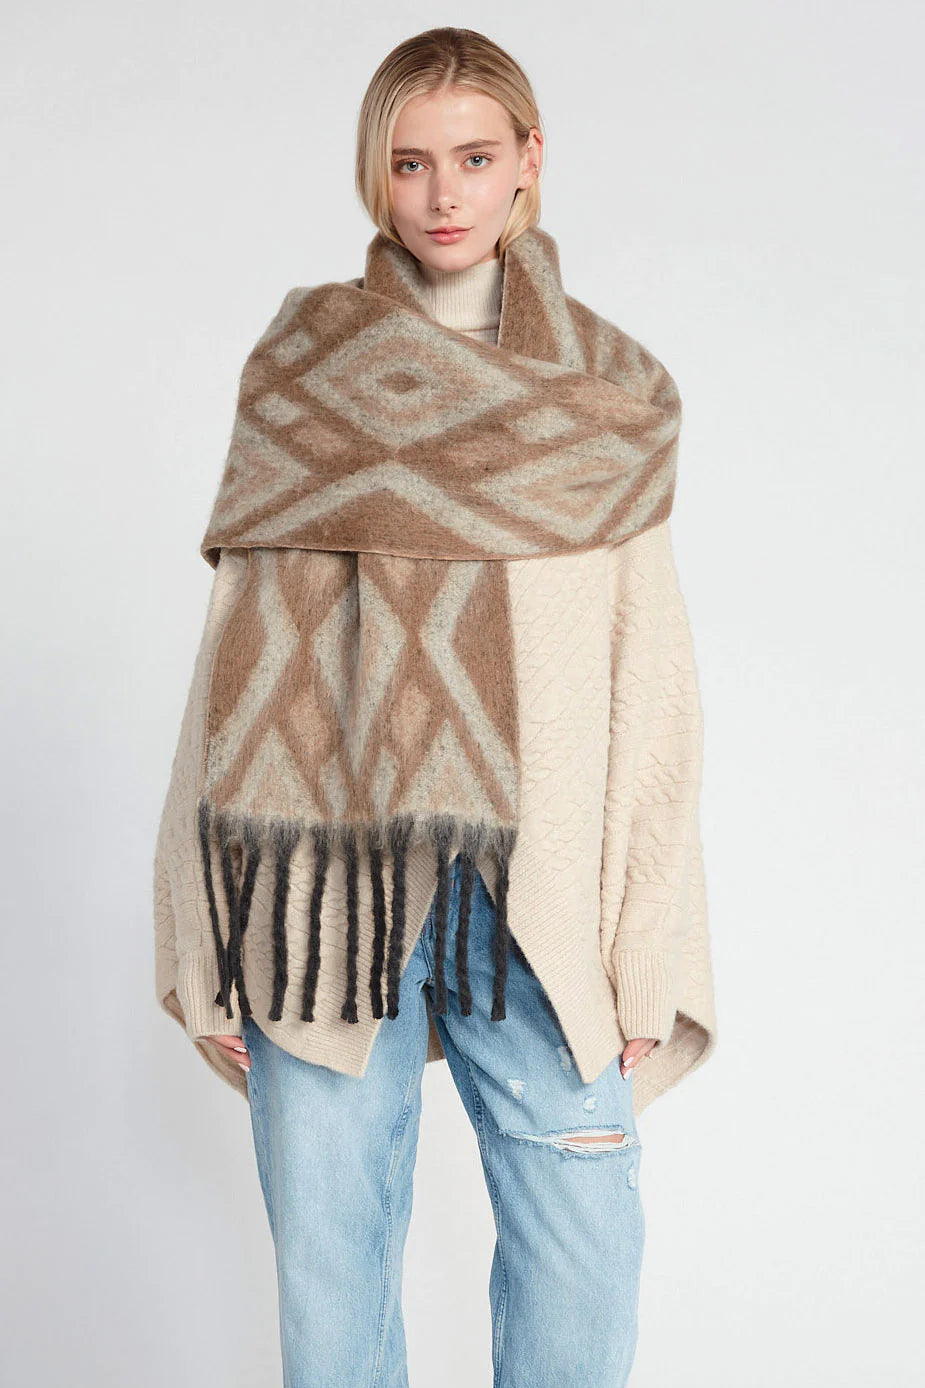 Cashmere Scarf with Classic Plaid & Fringe in Mocha, Blue, & Black